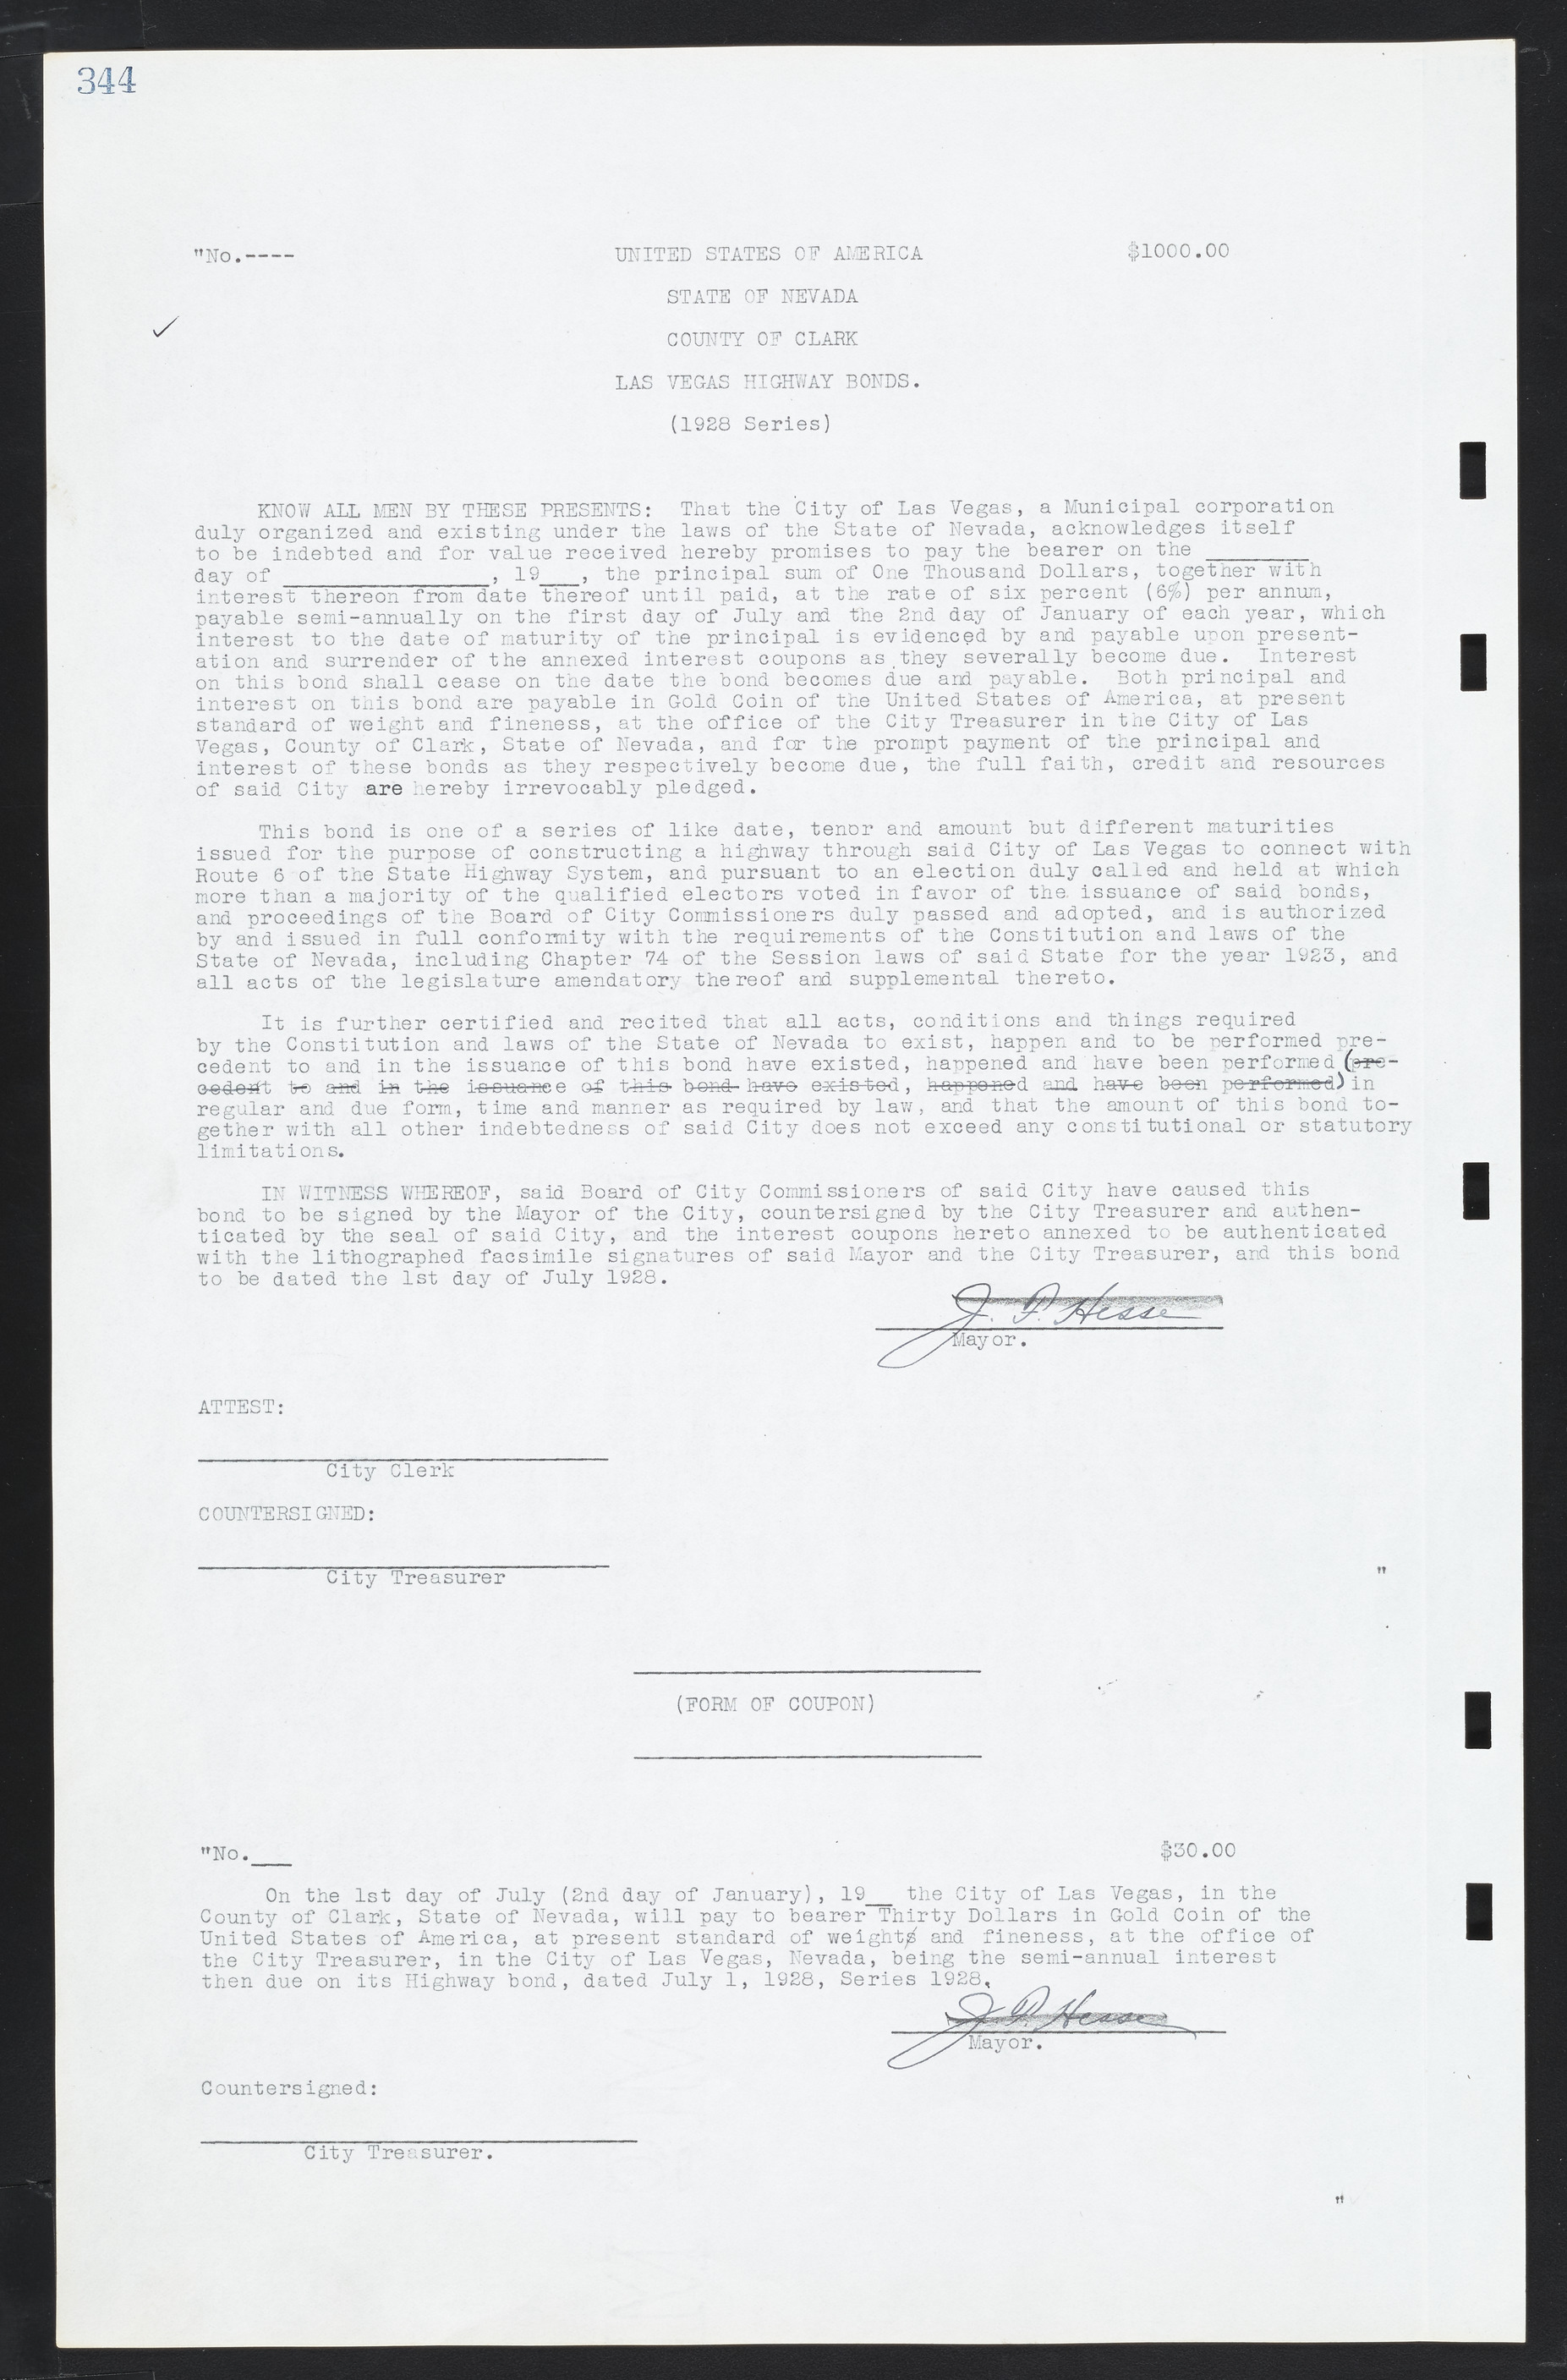 Las Vegas City Commission Minutes, March 1, 1922 to May 10, 1929, lvc000002-353